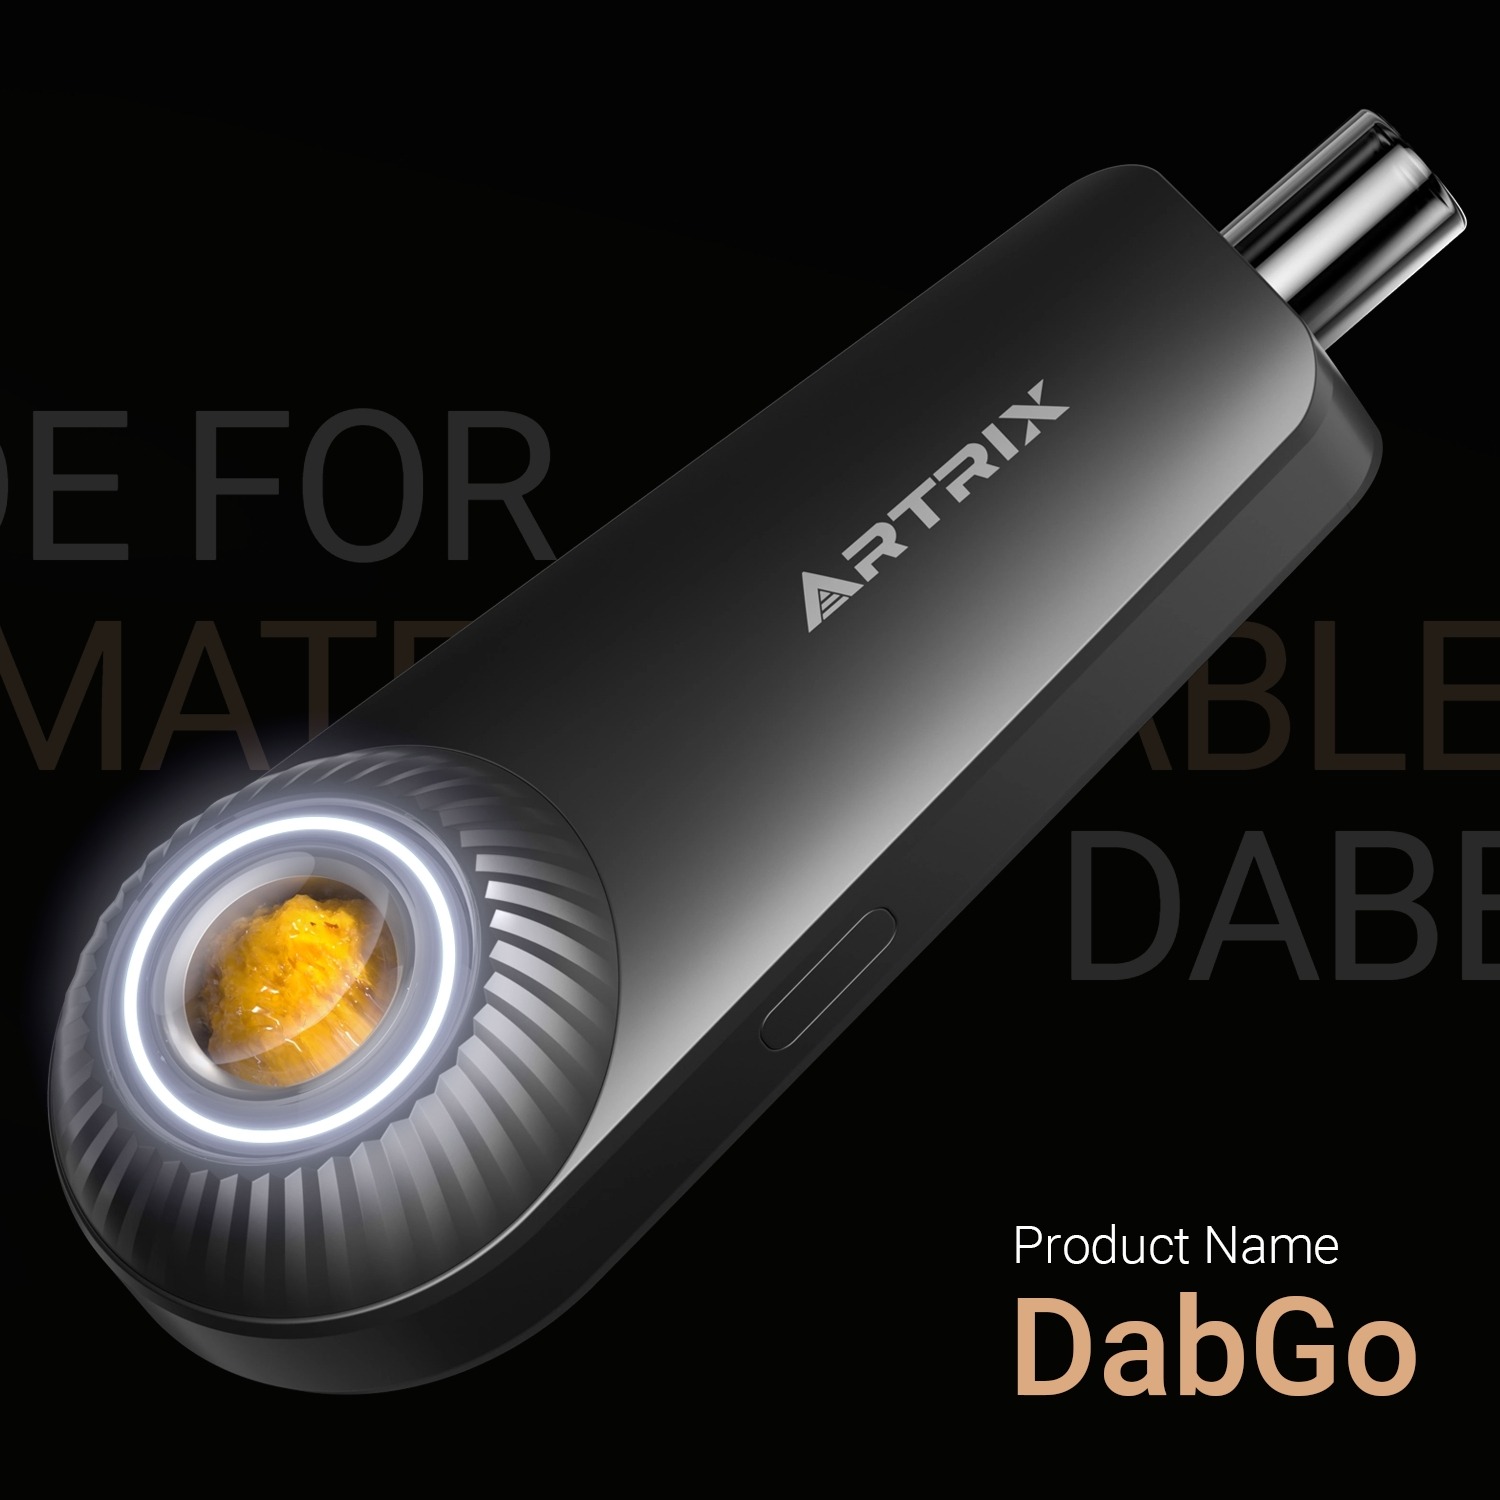 DabGo—The First-Ever Disposable Dab Pen 1139